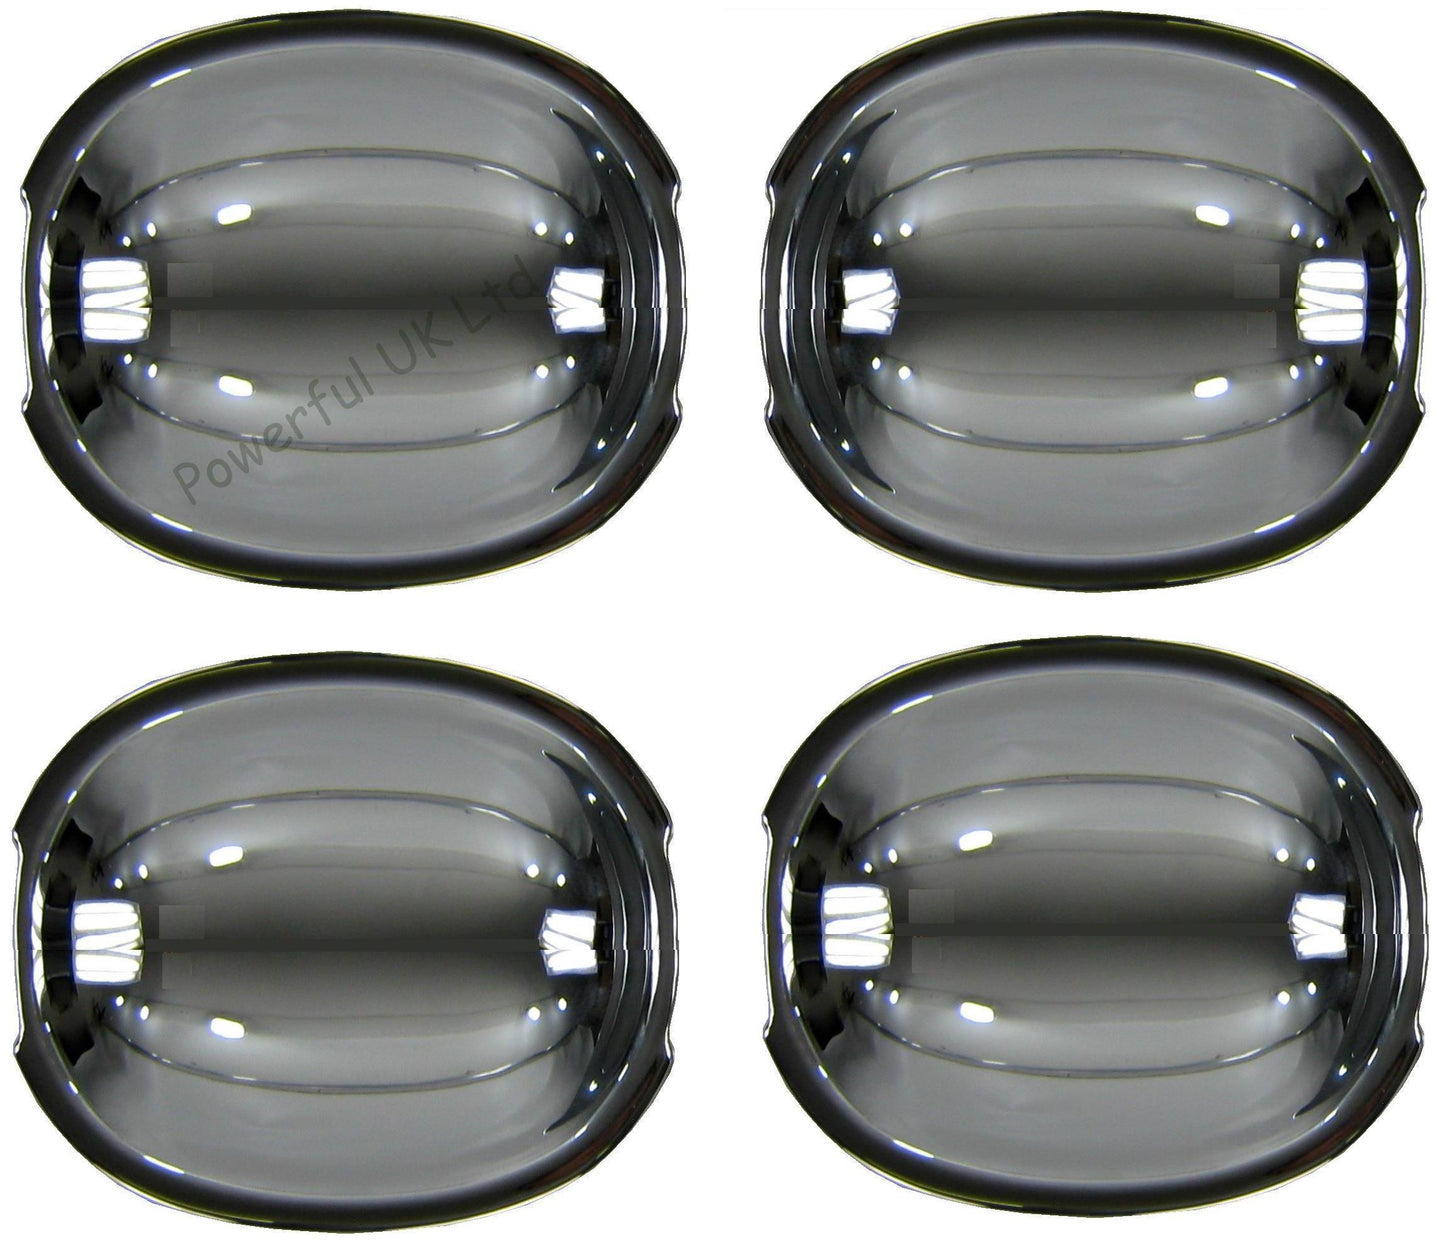 Door Handle Scuff Plate for Land Rover Freelander 2 - Chrome ABS